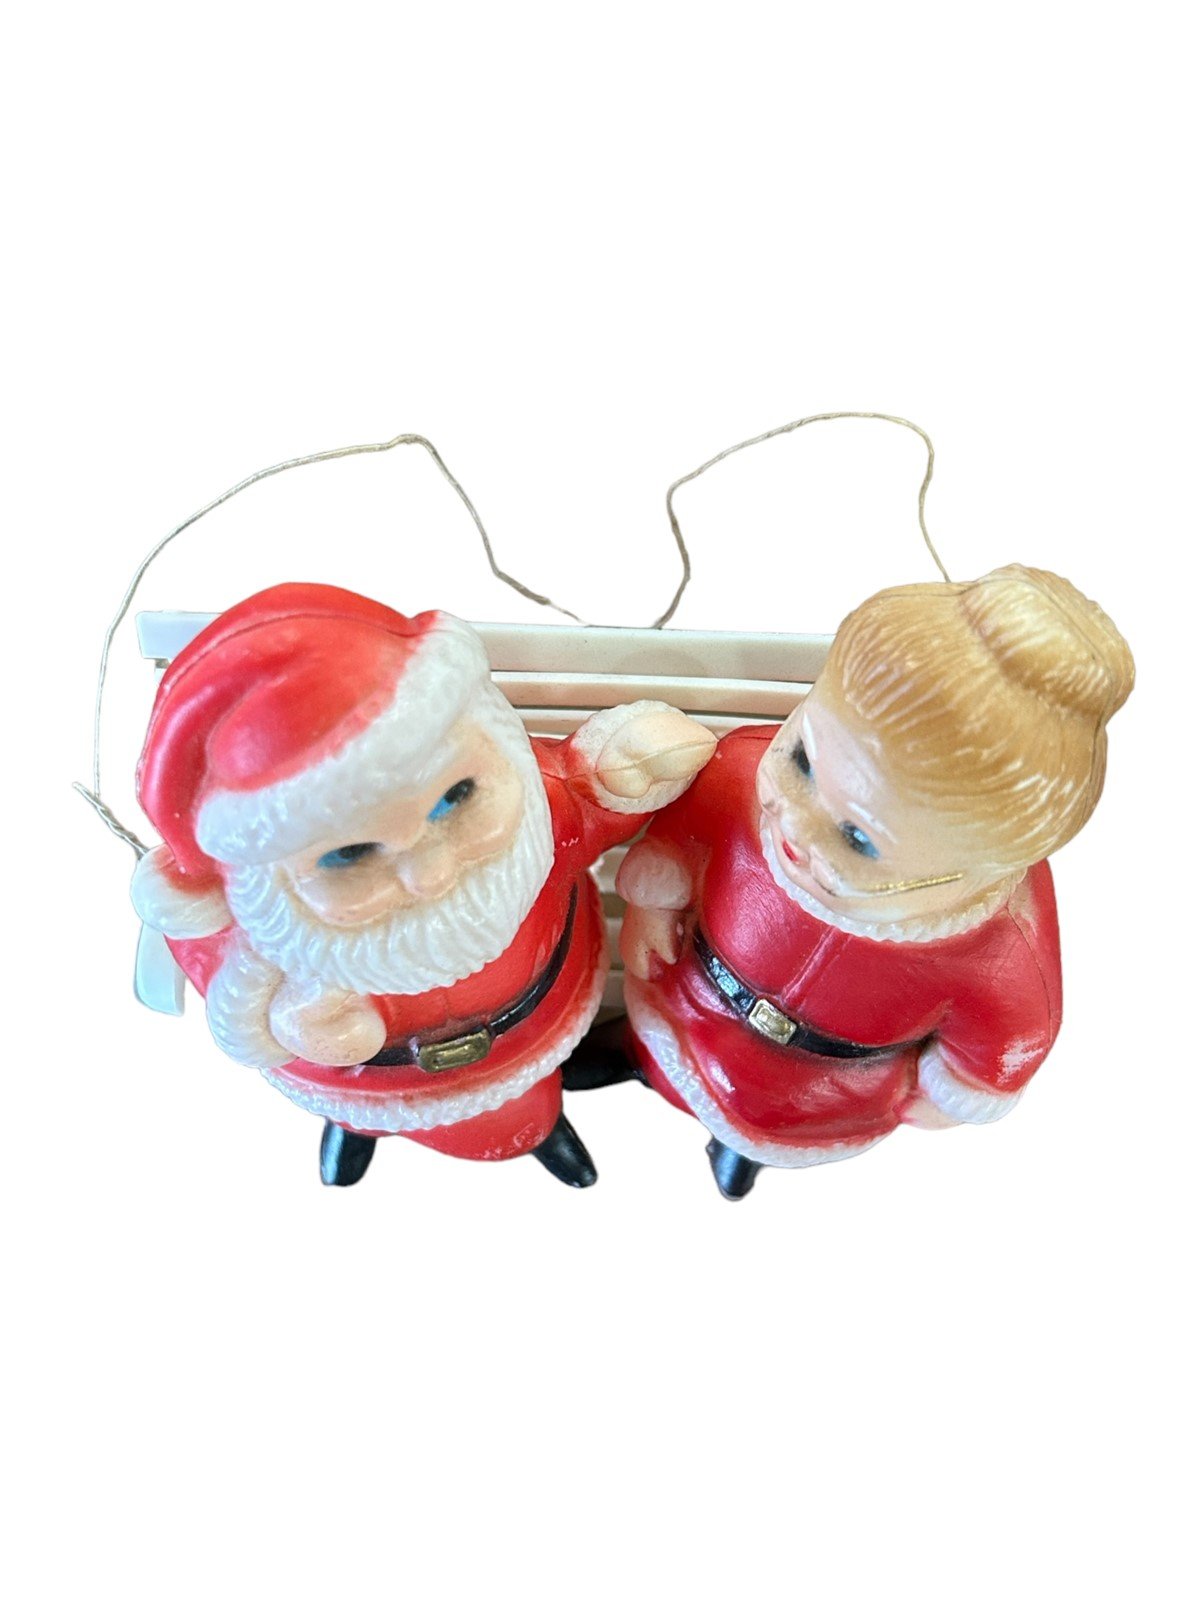 Santa and Mrs. Claus Blowmold on a Bench Vintage Mini Christmas Decor Holiday